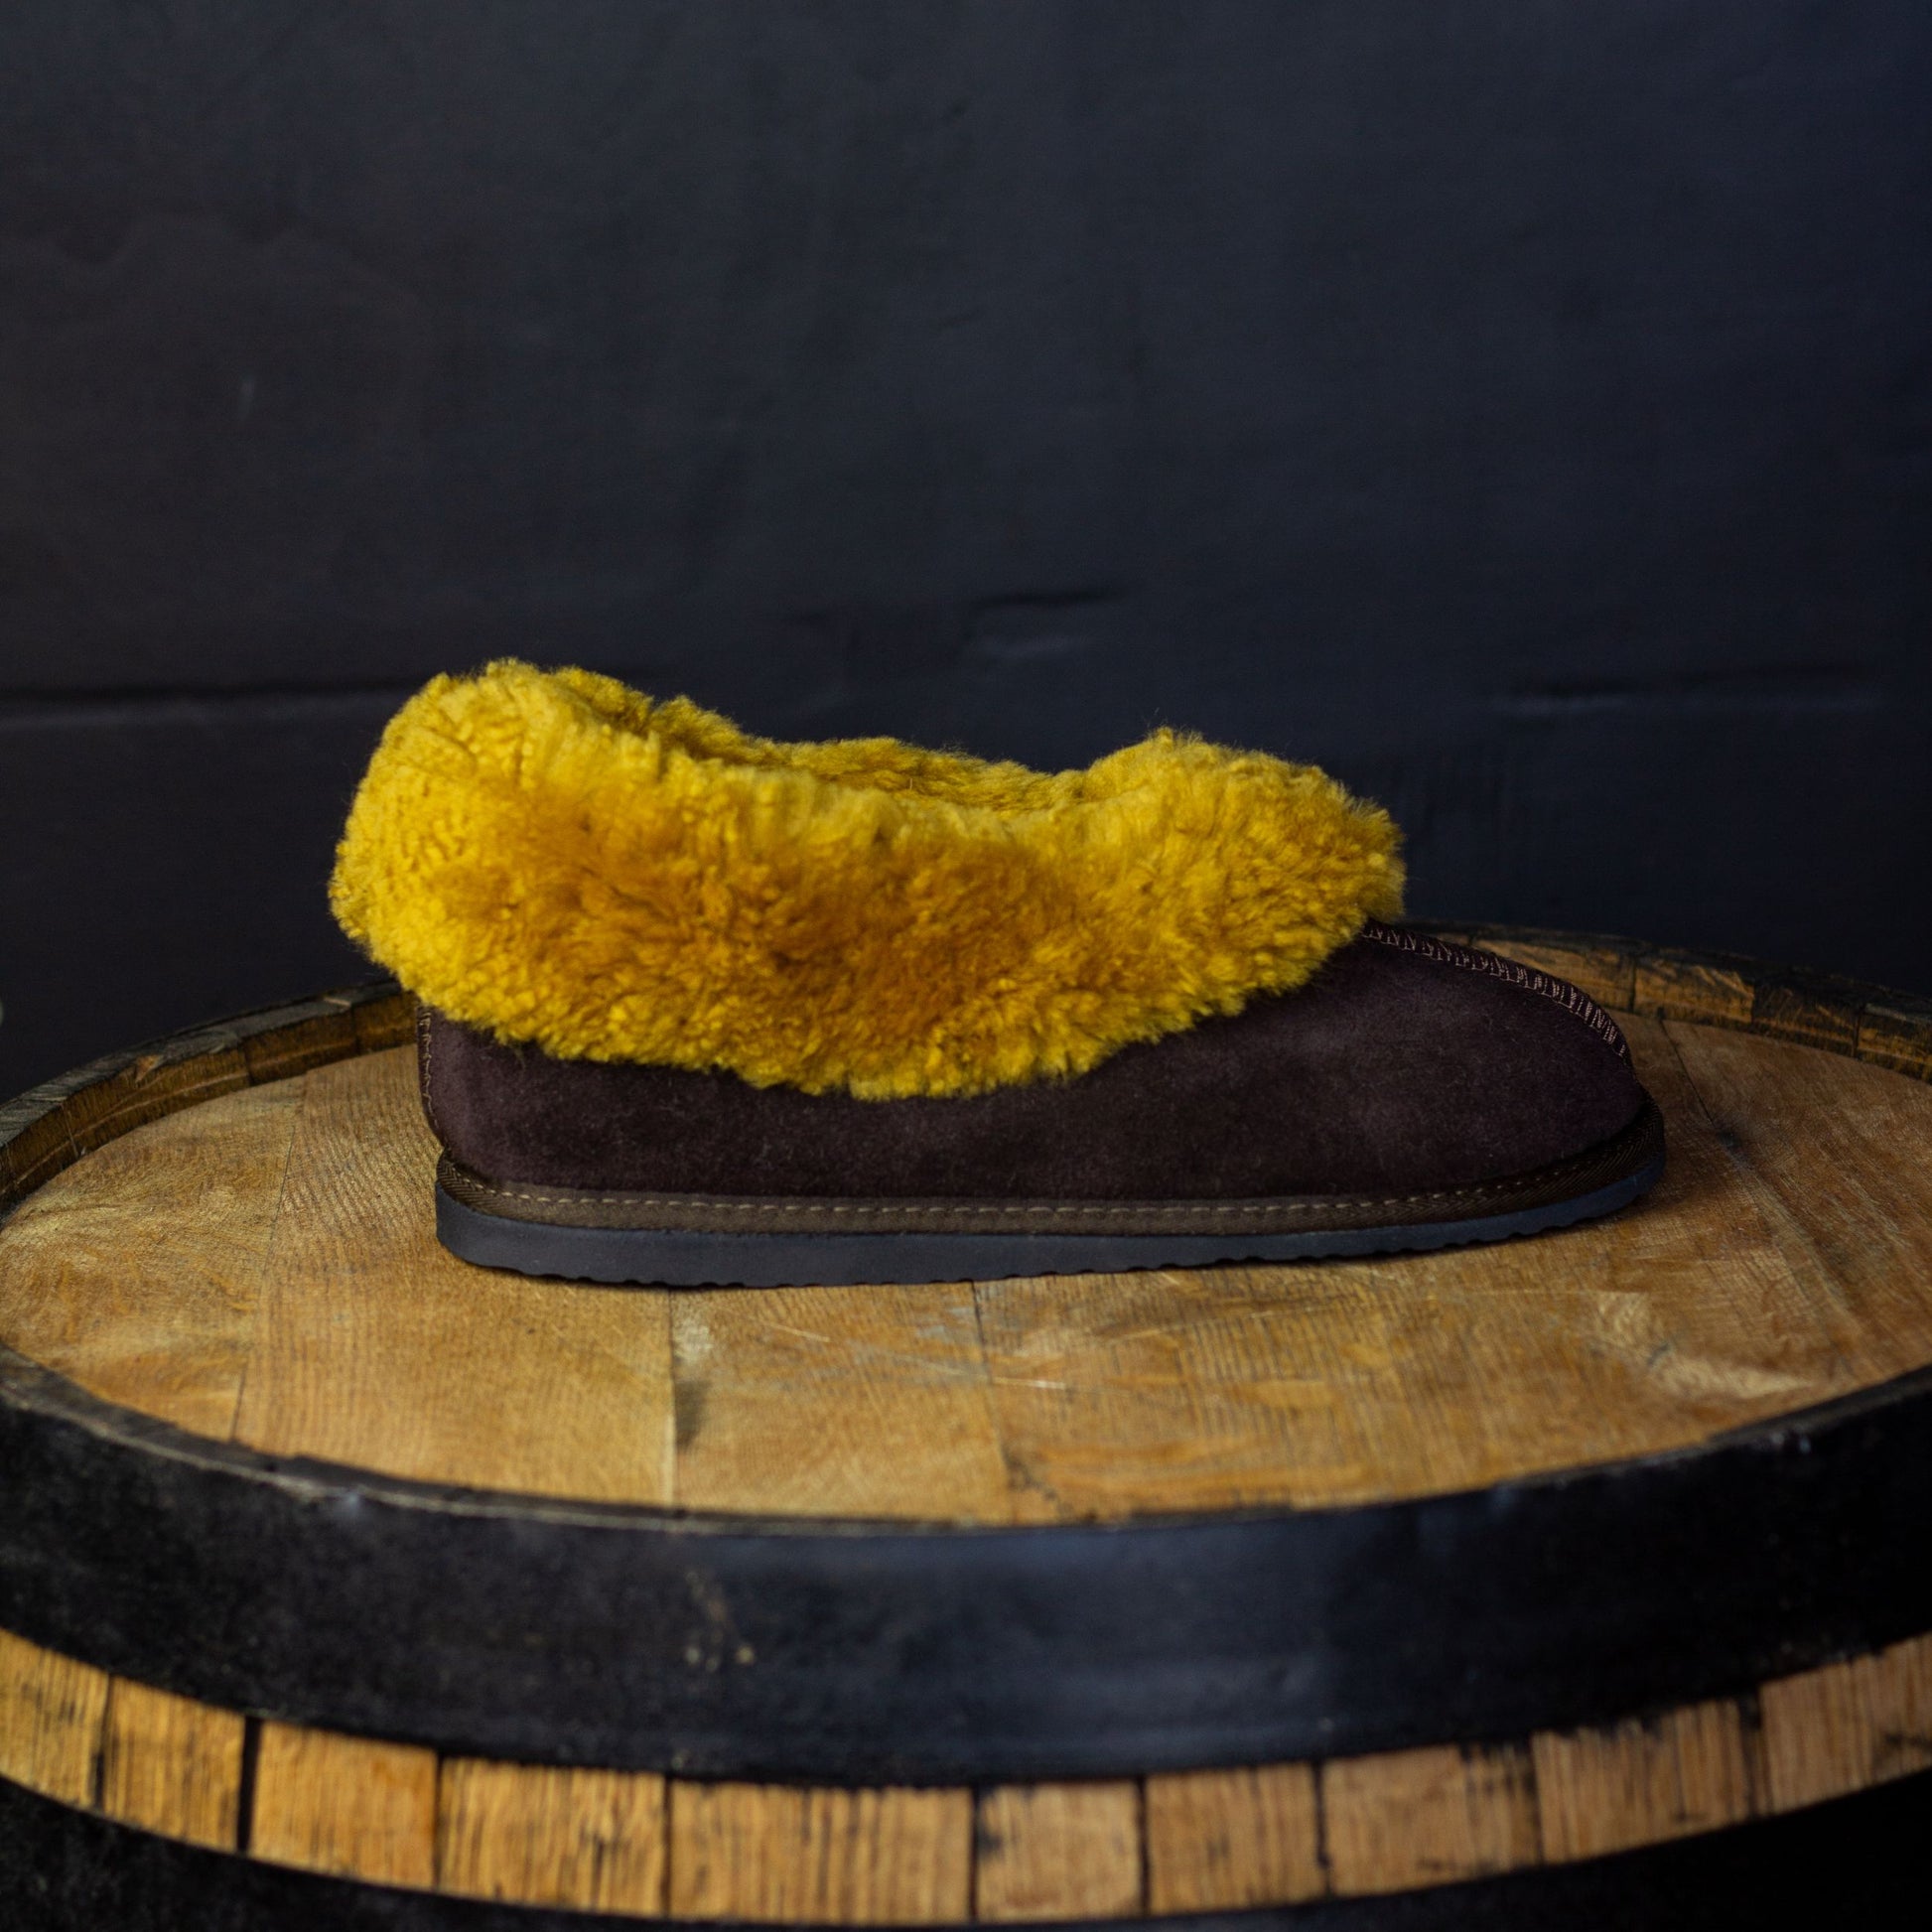 gold and brown sheepskin slippers with rubber sole